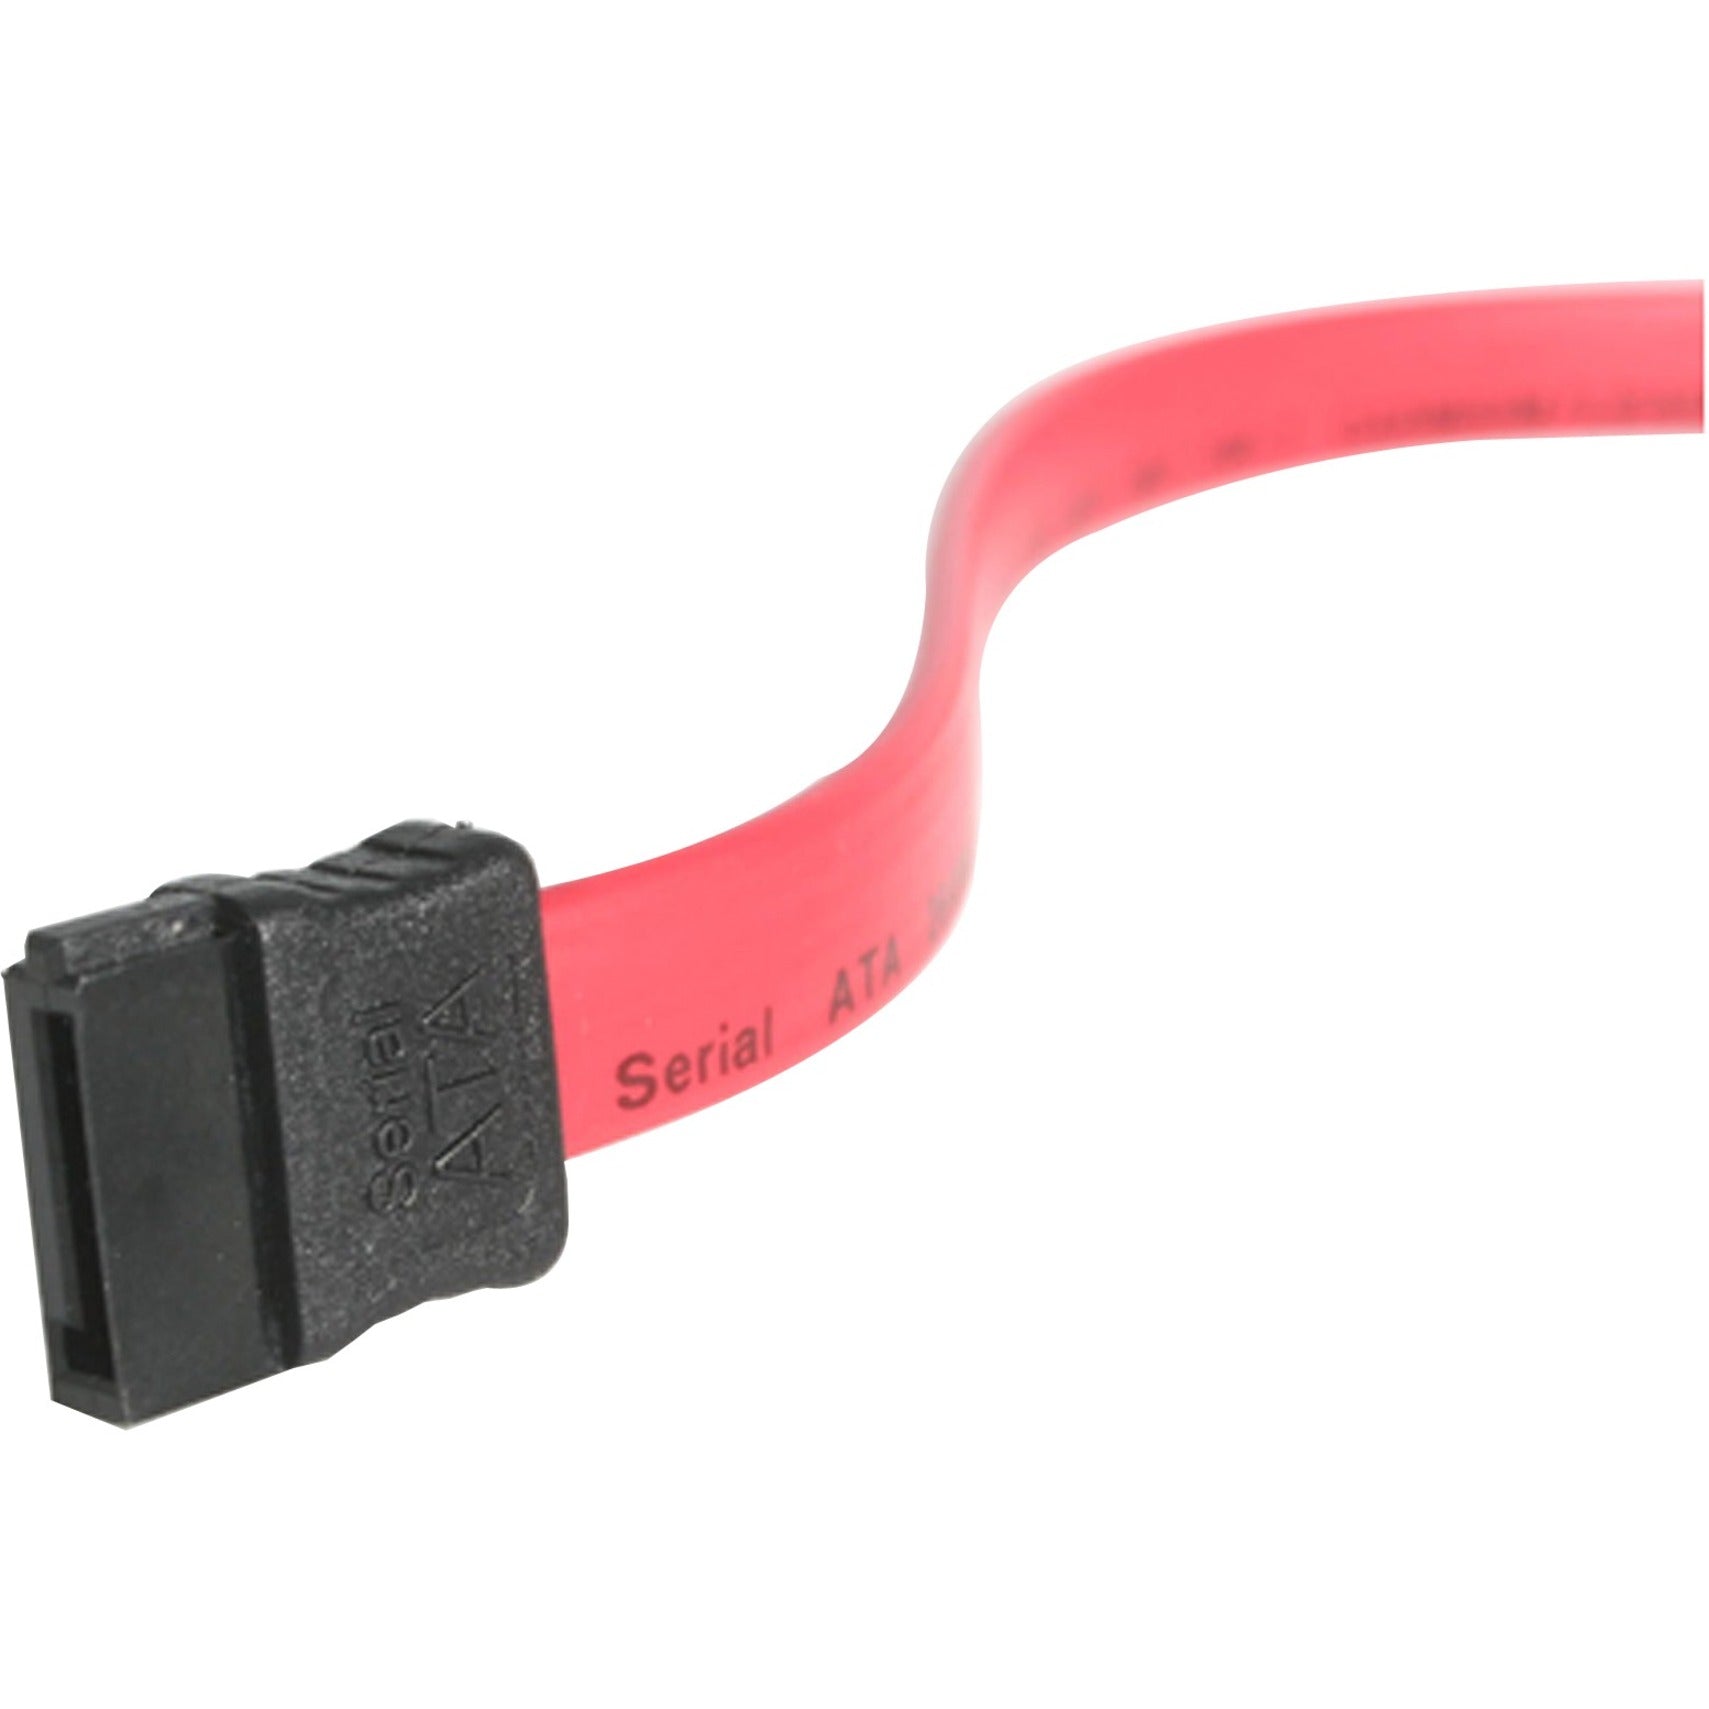 StarTech.com SAS729PW18 18in SAS 29 Pin to SATA Cable with LP4 Power, Faster and More Reliable 3 Gb/s Data Transfer